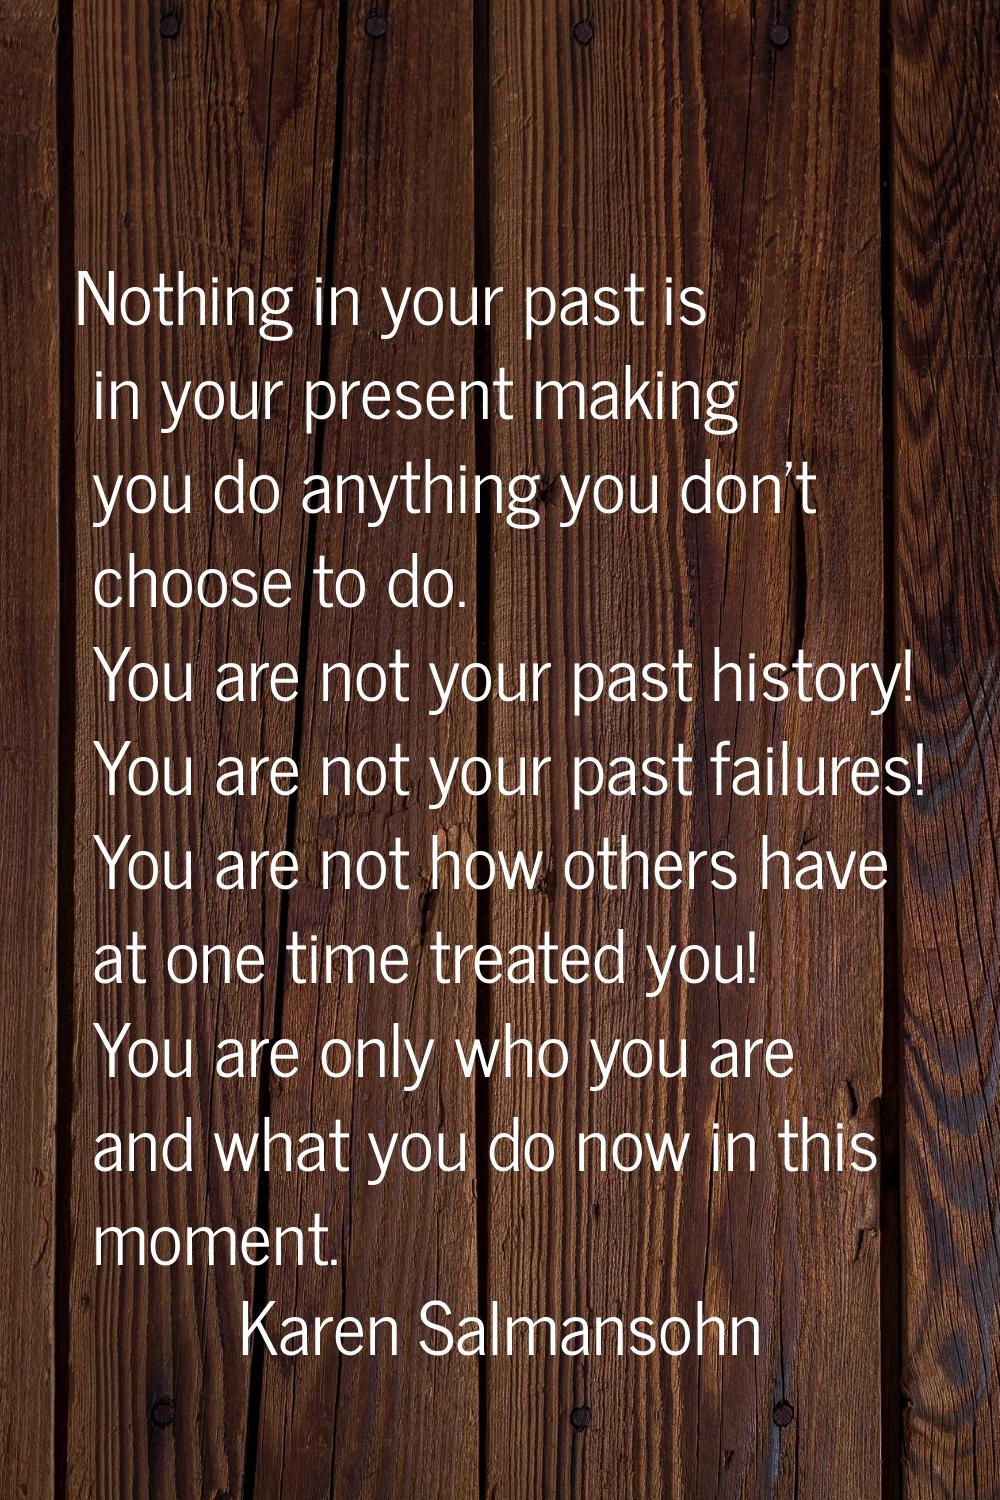 Nothing in your past is in your present making you do anything you don't choose to do. You are not 